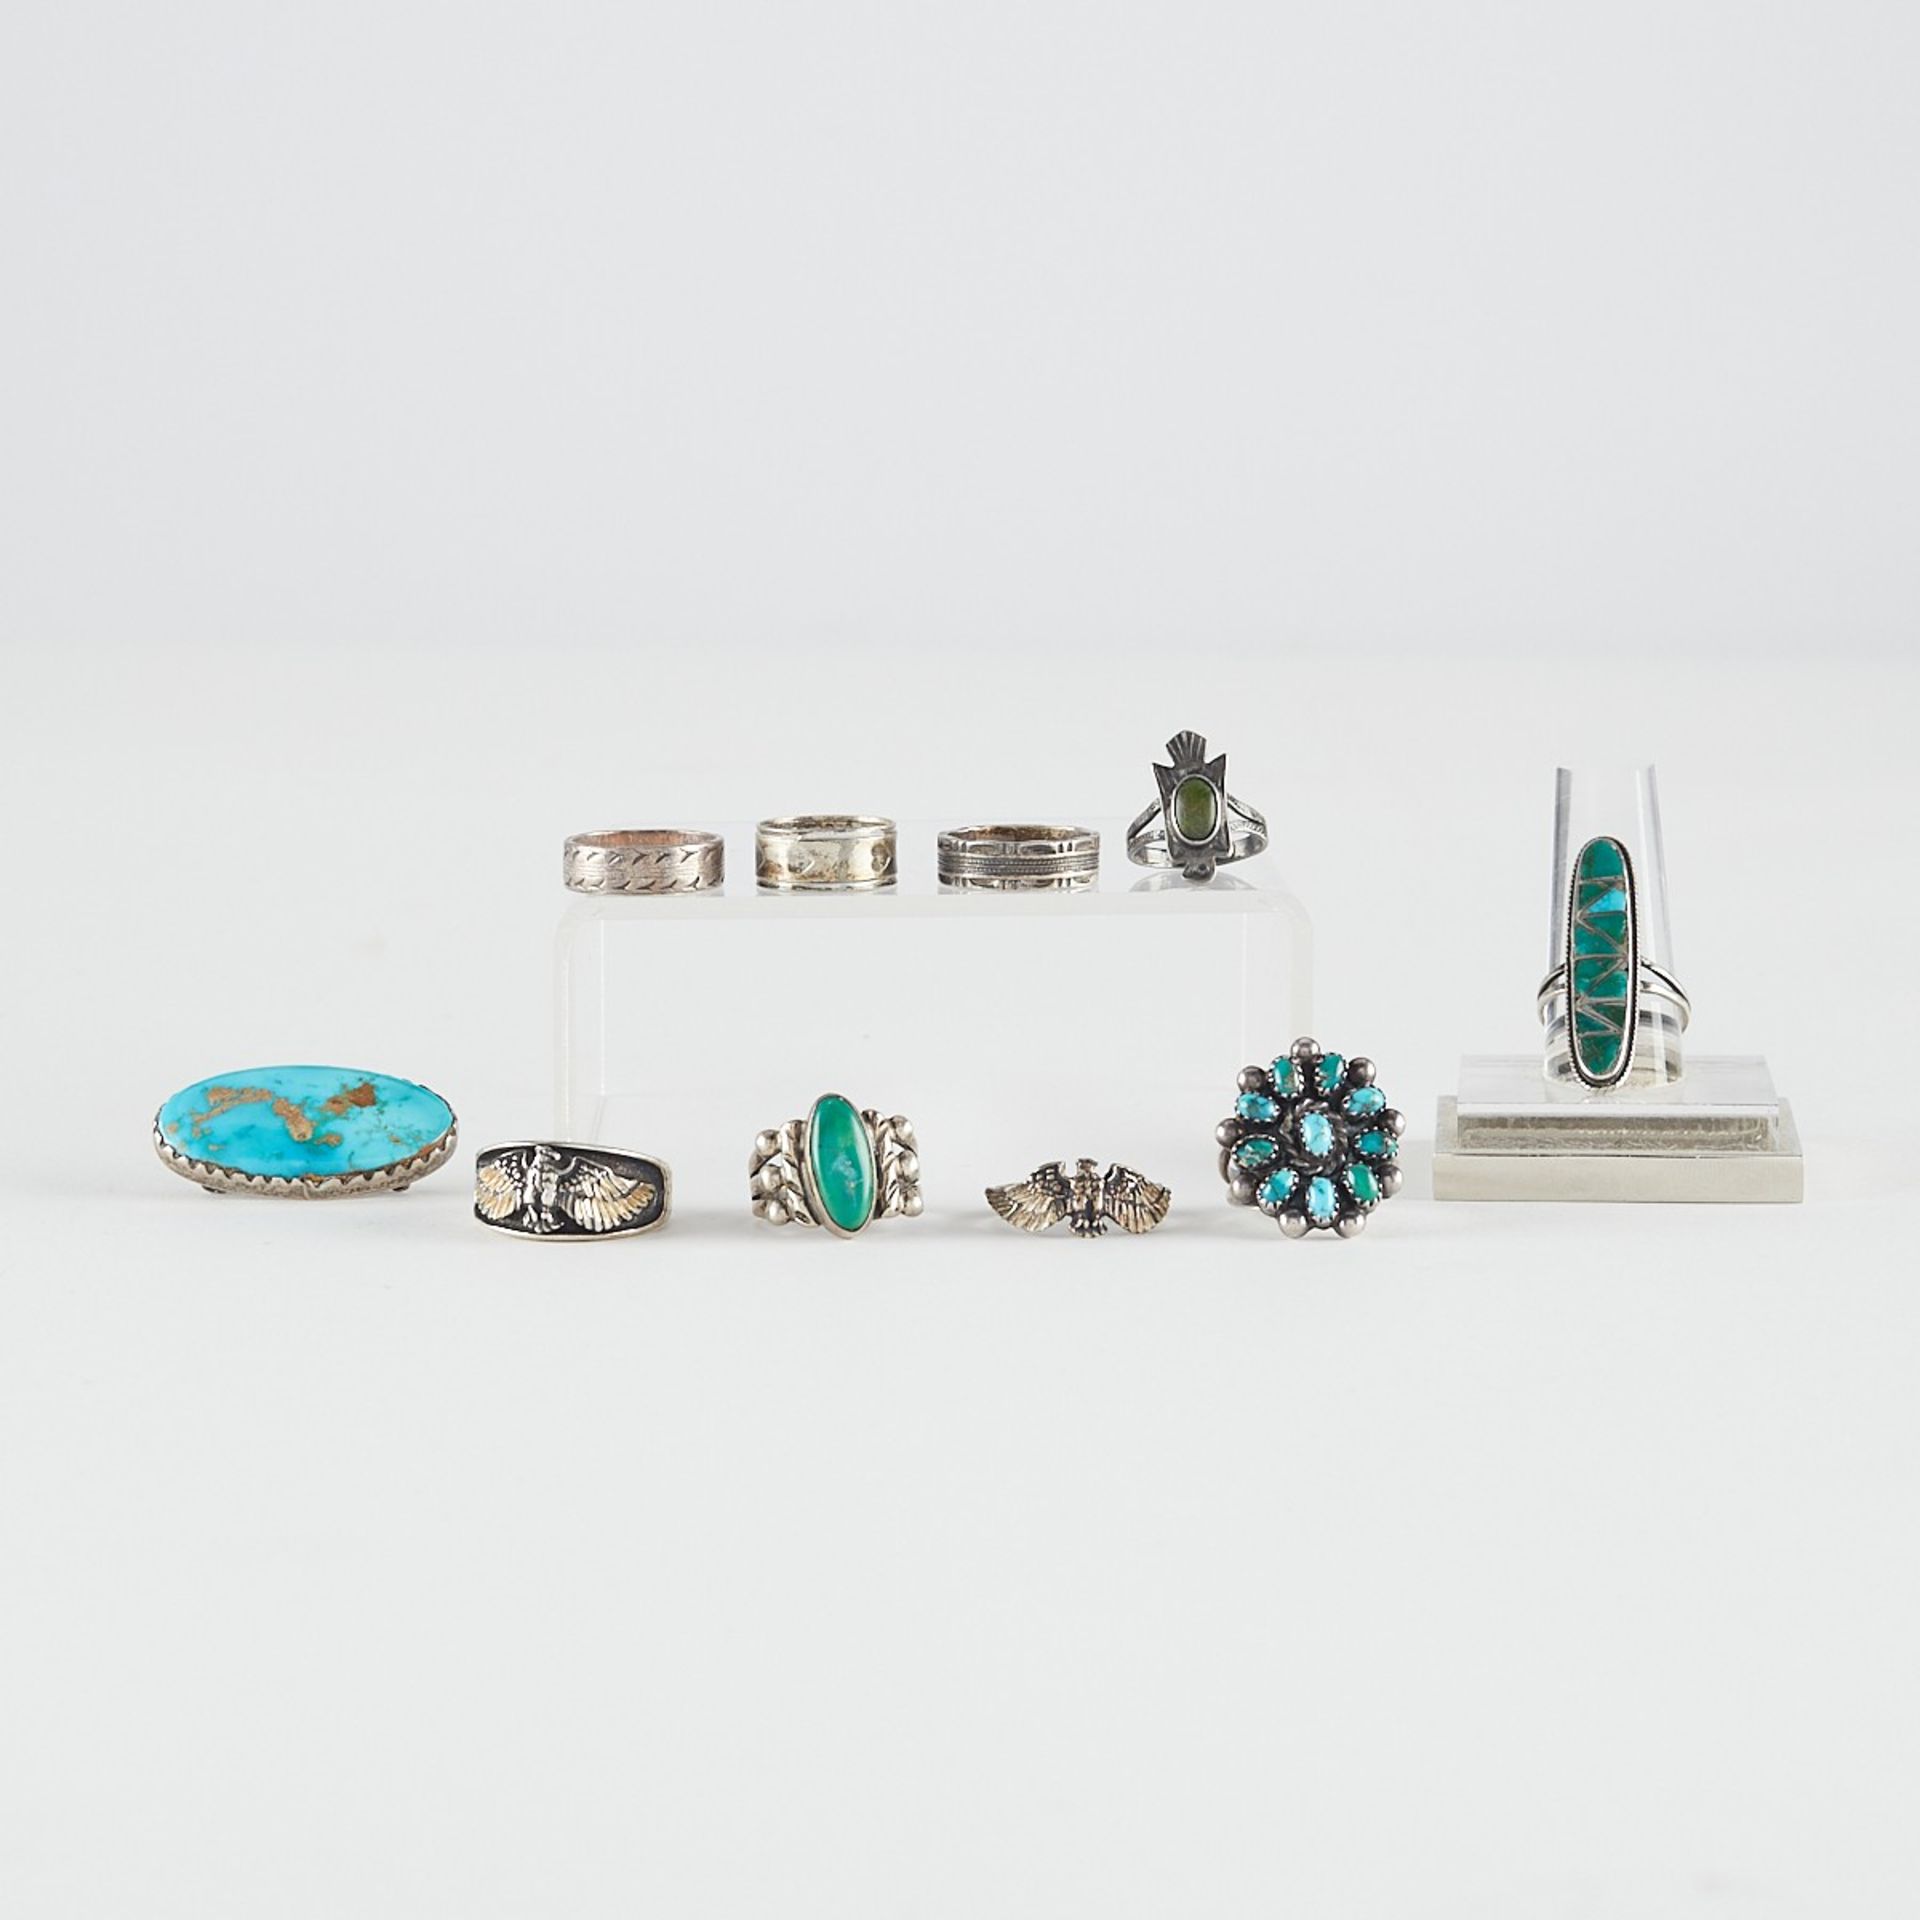 10 Southwest Sterling & Turquoise Rings & Pin - Image 2 of 17